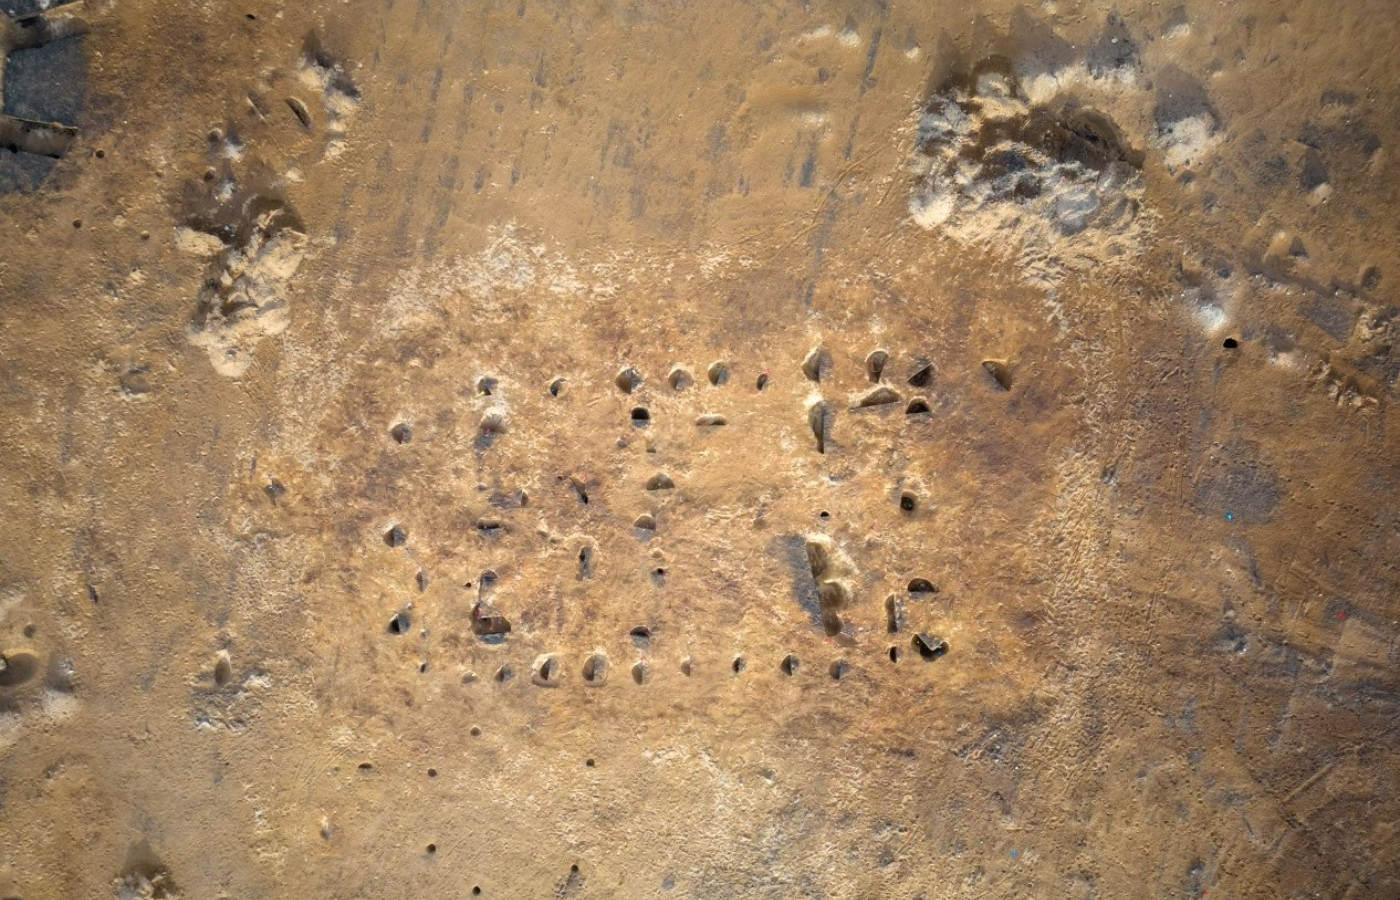 Aerial view of postholes and pits at the excavation site of a possible Neolithic timber 'hall'.